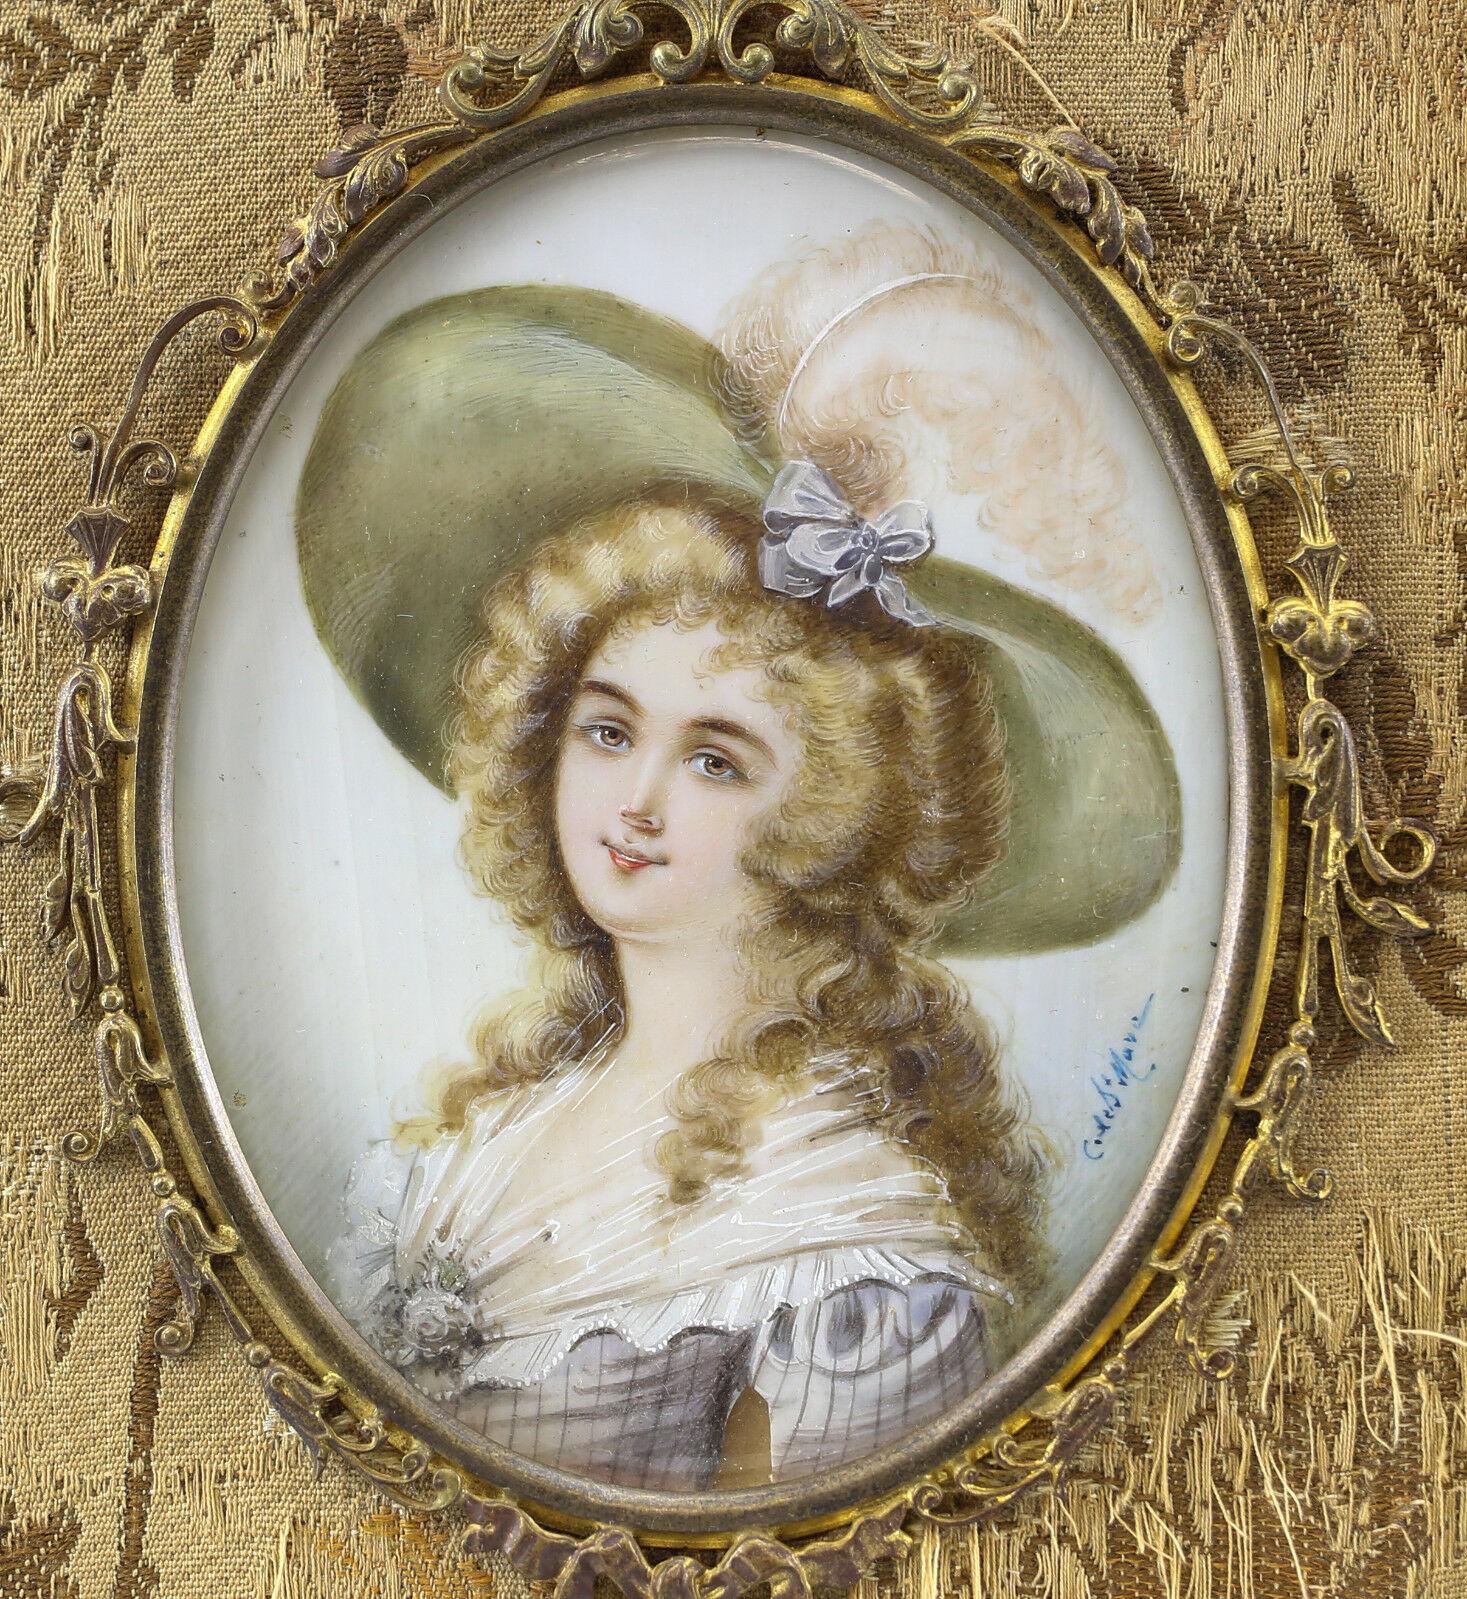 French Miniature Lady's Portrait Gilt Bronze Frame Hand Painted, 19th Century

Signed. 19th Century. Baroque style young gentlewoman in a large green hat.

Additional Information:
Region of Origin: Europe 
Size Type/Largest Dimension: Small